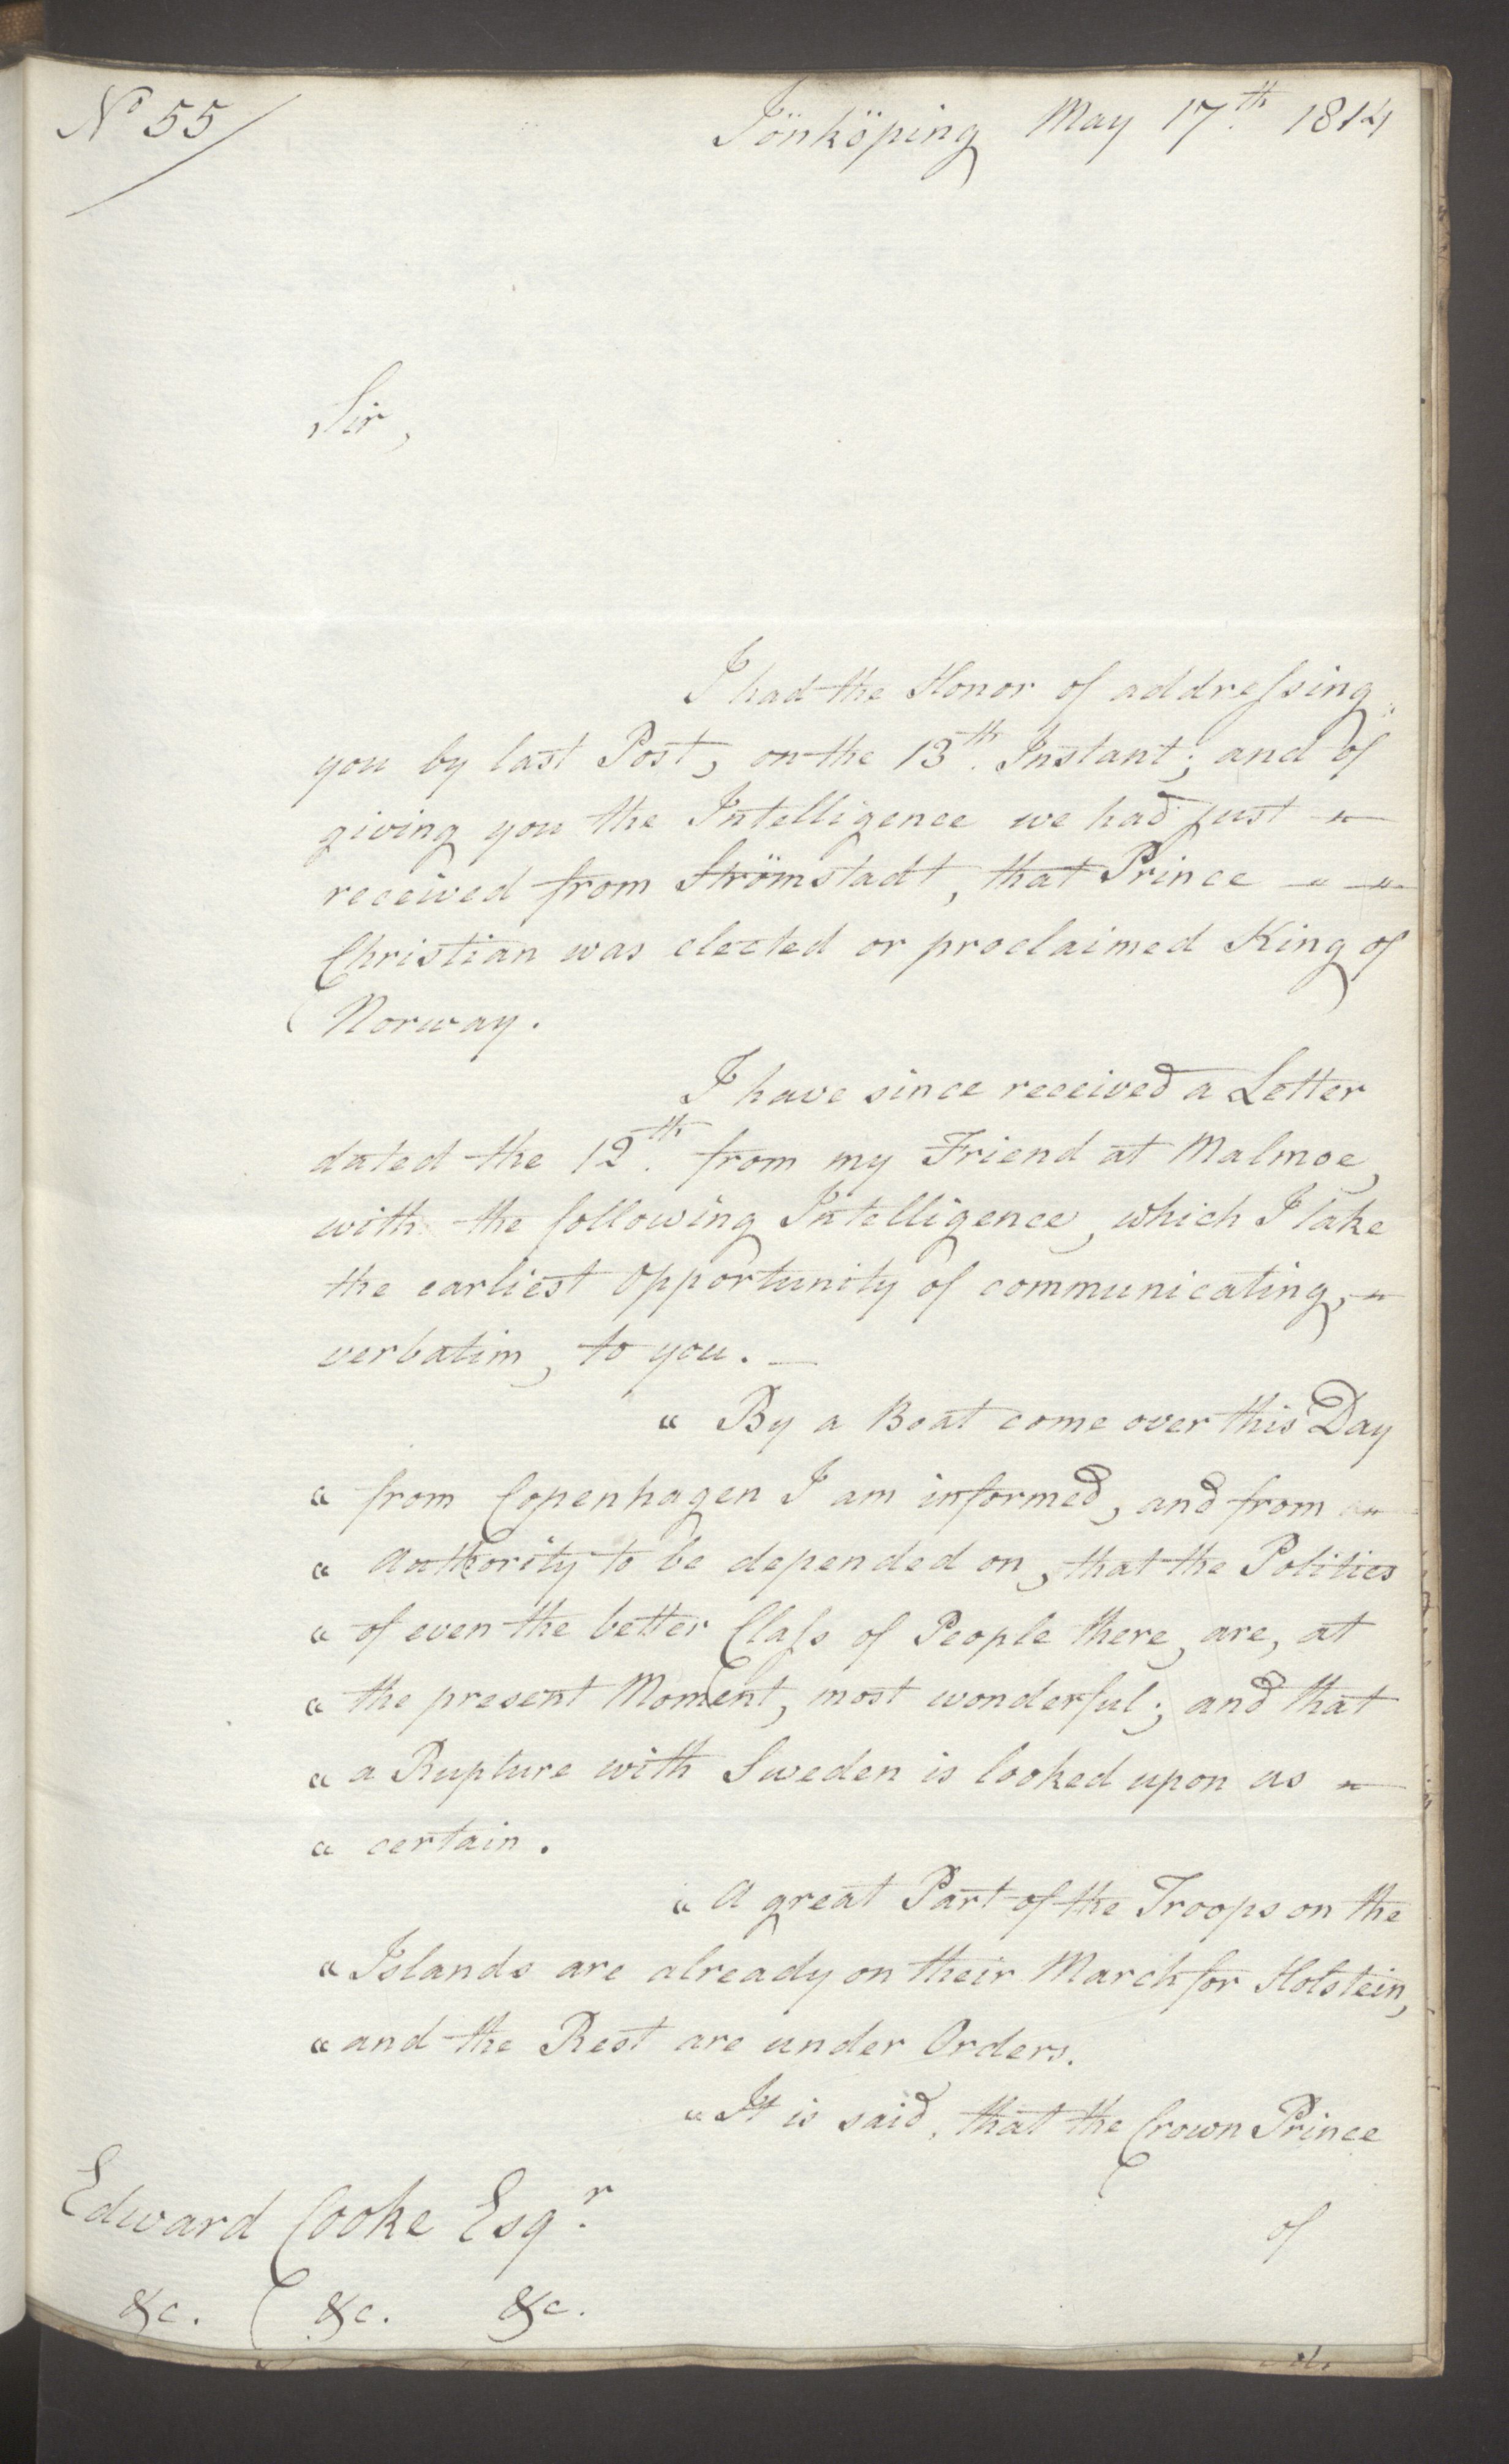 Foreign Office*, UKA/-/FO 38/16: Sir C. Gordon. Reports from Malmö, Jonkoping, and Helsingborg, 1814, p. 53